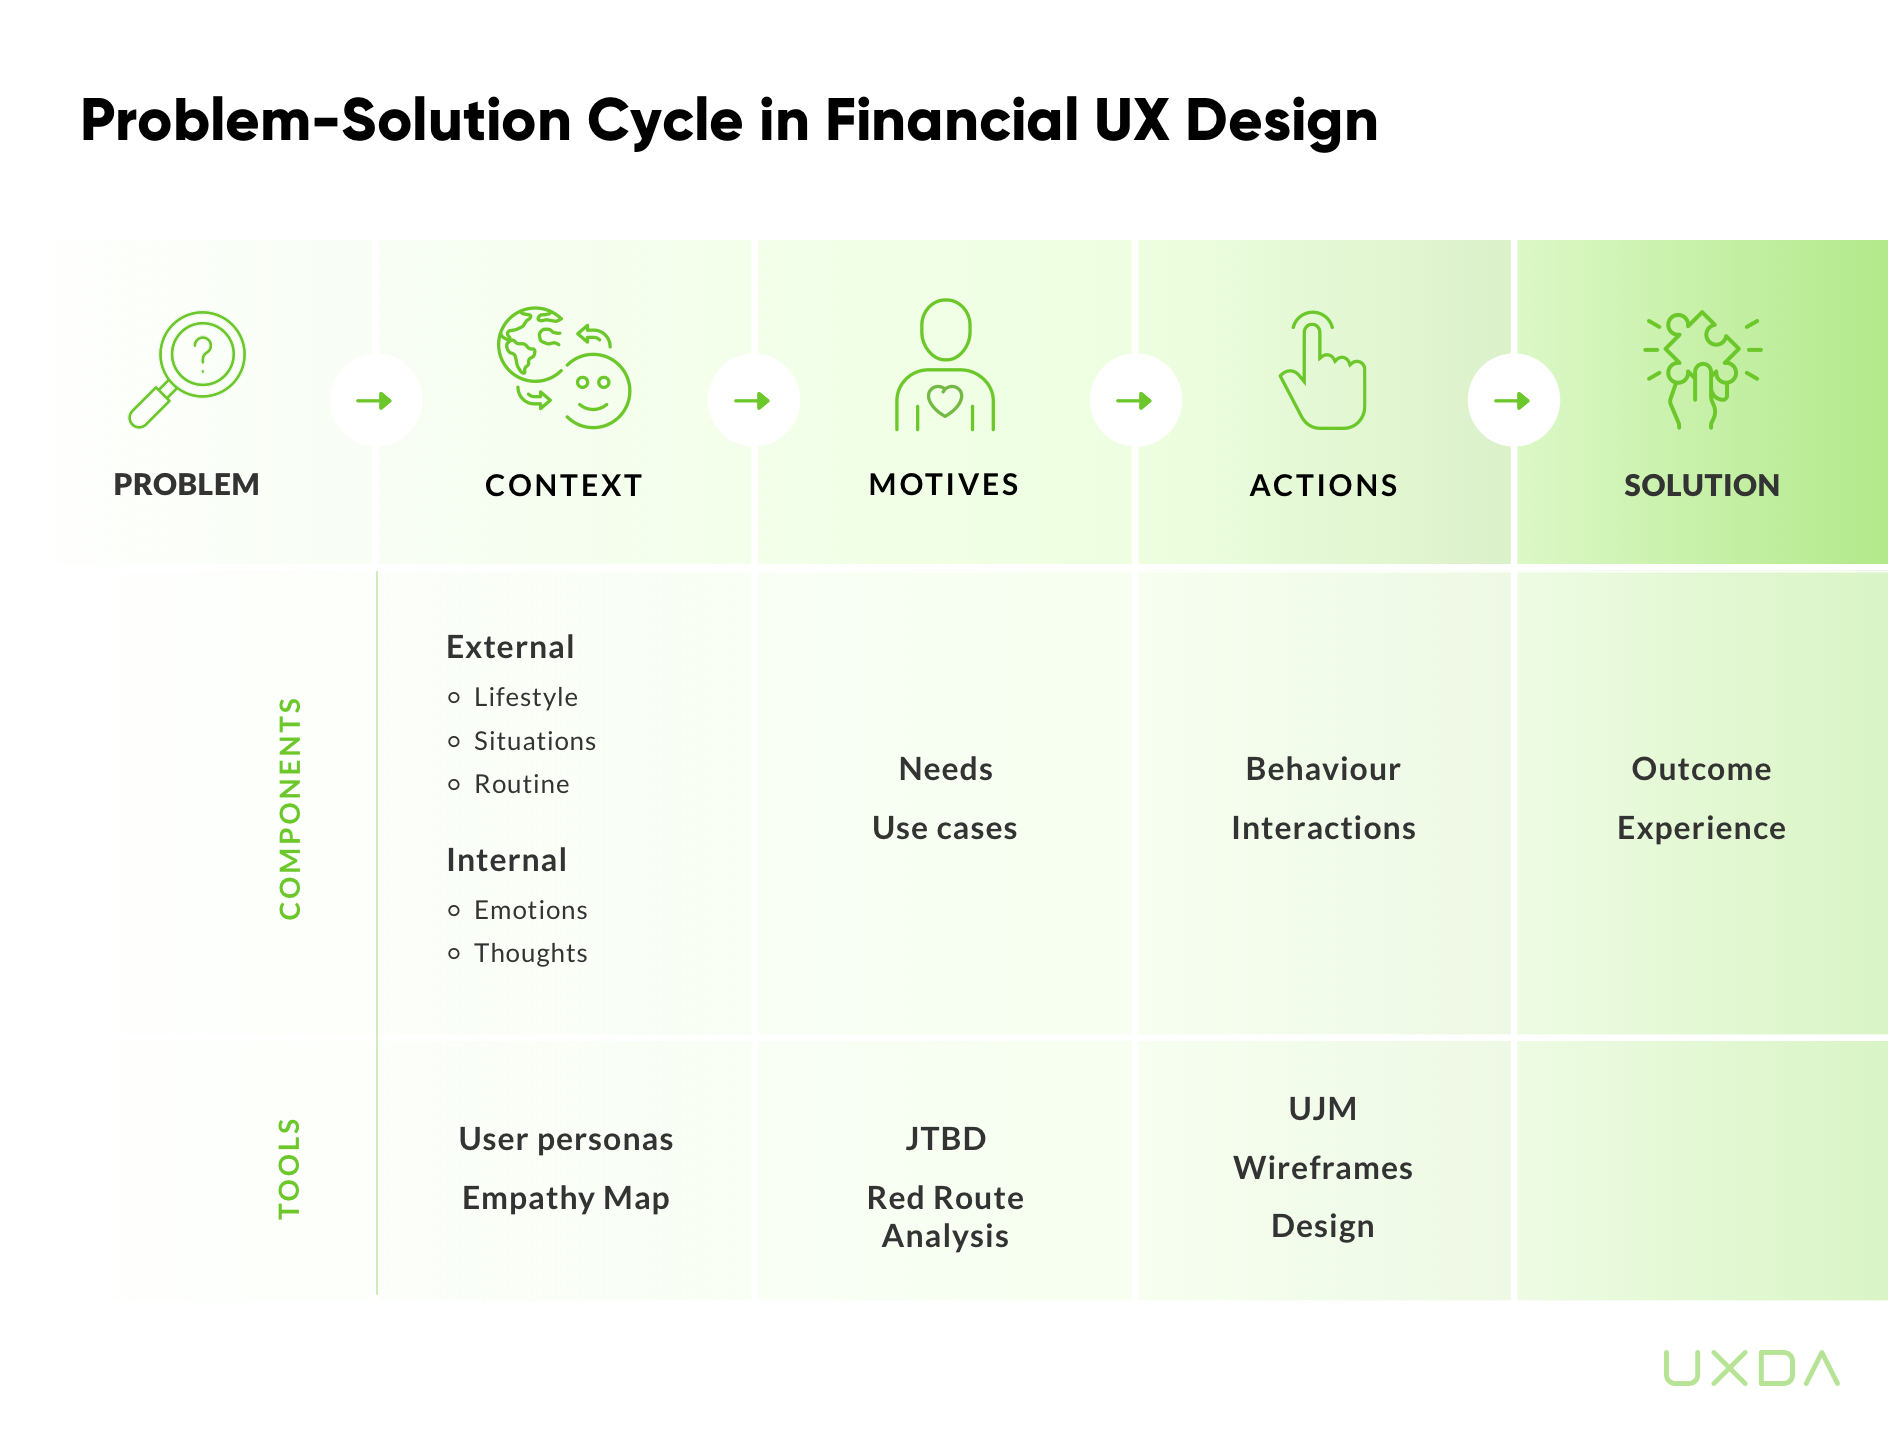 digital-financial-services-ux-problem-solution-cycle.jpg